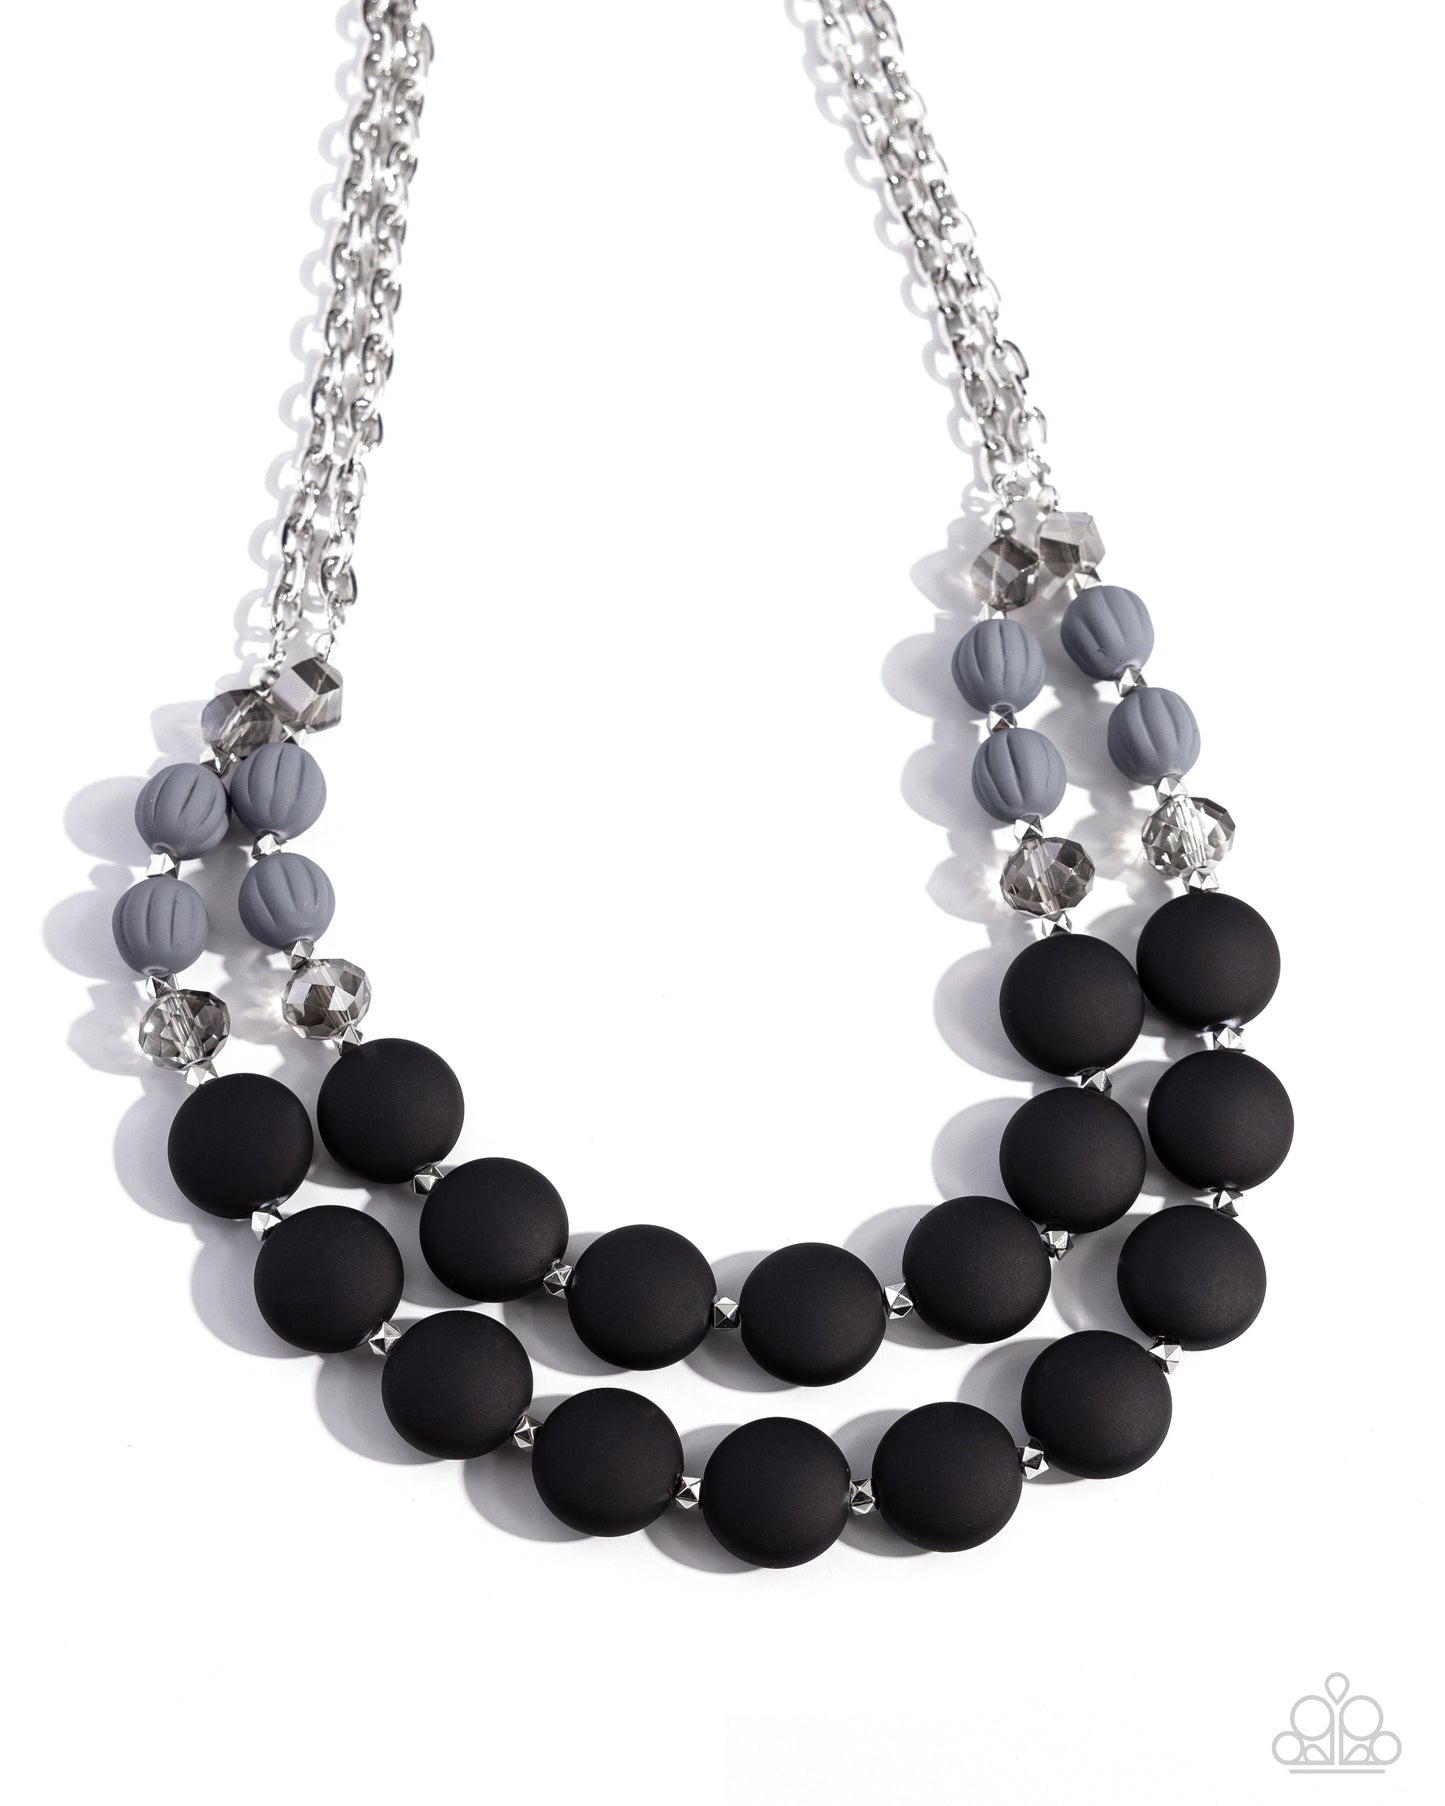 <p data-mce-fragment="1">Paparazzi Accessories - Whimsically Wealthy - Black Necklaces smoky faceted beads, silver beads, Sharkskin beads, and black matte beads are infused along classic silver chains that layer below the neckline for a colorfully charismatic look. Features an adjustable clasp closure.</p> <p data-mce-fragment="1"><i data-mce-fragment="1">Sold as one individual necklace. Includes one pair of matching earrings.</i></p>